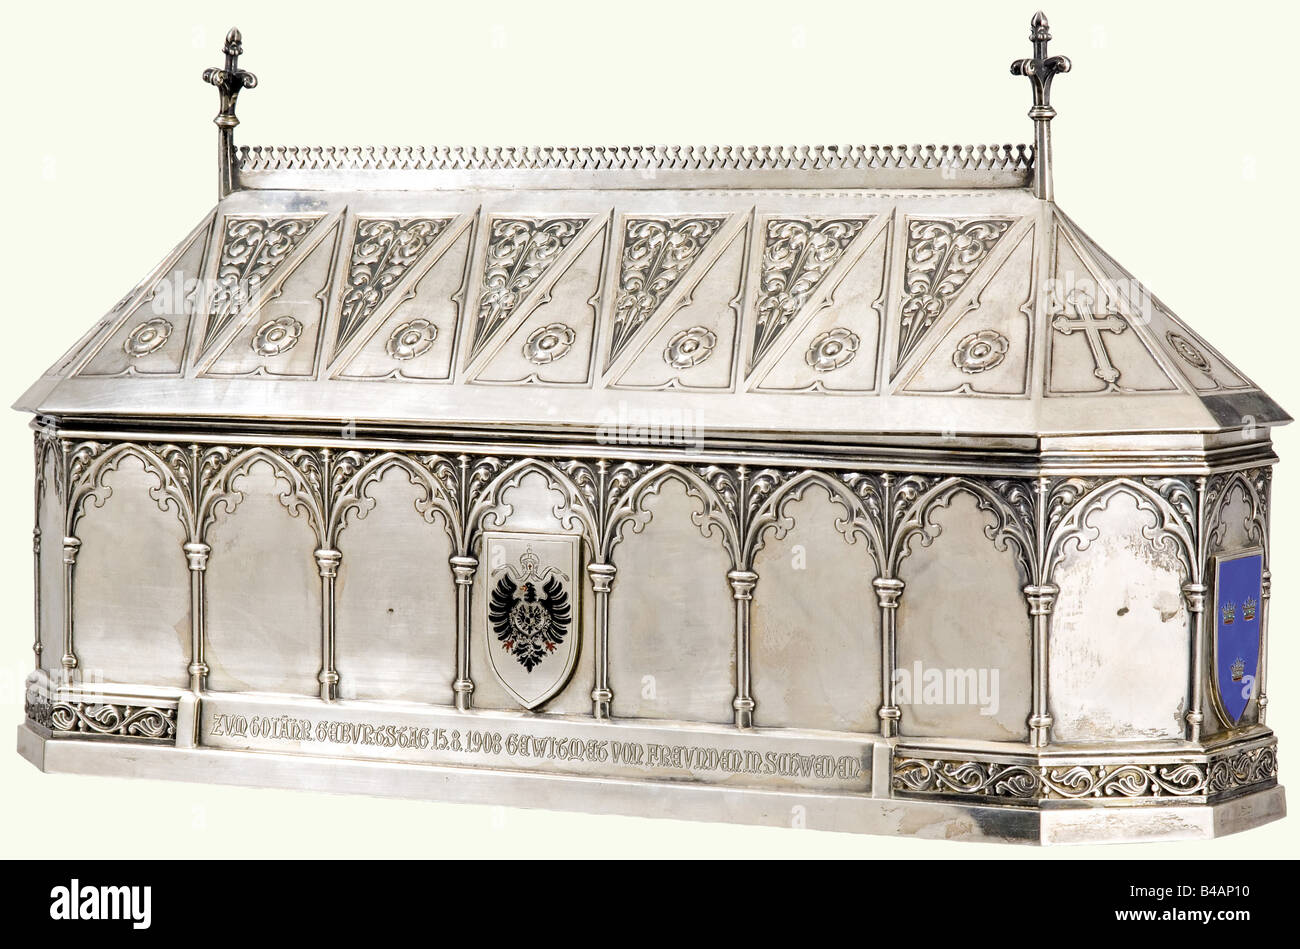 A group for Bishop Albertus Bitter., An elongated octagonal silver sarcophagus case with arch decoration. An enamelled coat of arms of Melle, Sweden, Stockholm and the imperial German eagle are superimposed on the sides. The lower frieze is engraved 'Herrn Bischof Dr. Albertus Bitter zum 60jähr Geburtstag 15.8.1908 gewidmet von Freunden in Schweden (To Bishop Dr. Albertus Bitter on his 60th Birthday from his Friends in Sweden). German and Swedish silver hallmarks. Weight 2360 grams. 38 x 12 x 20 cm. There is also the presentation document on parchment, Artist's Copyright has not to be cleared Stock Photo